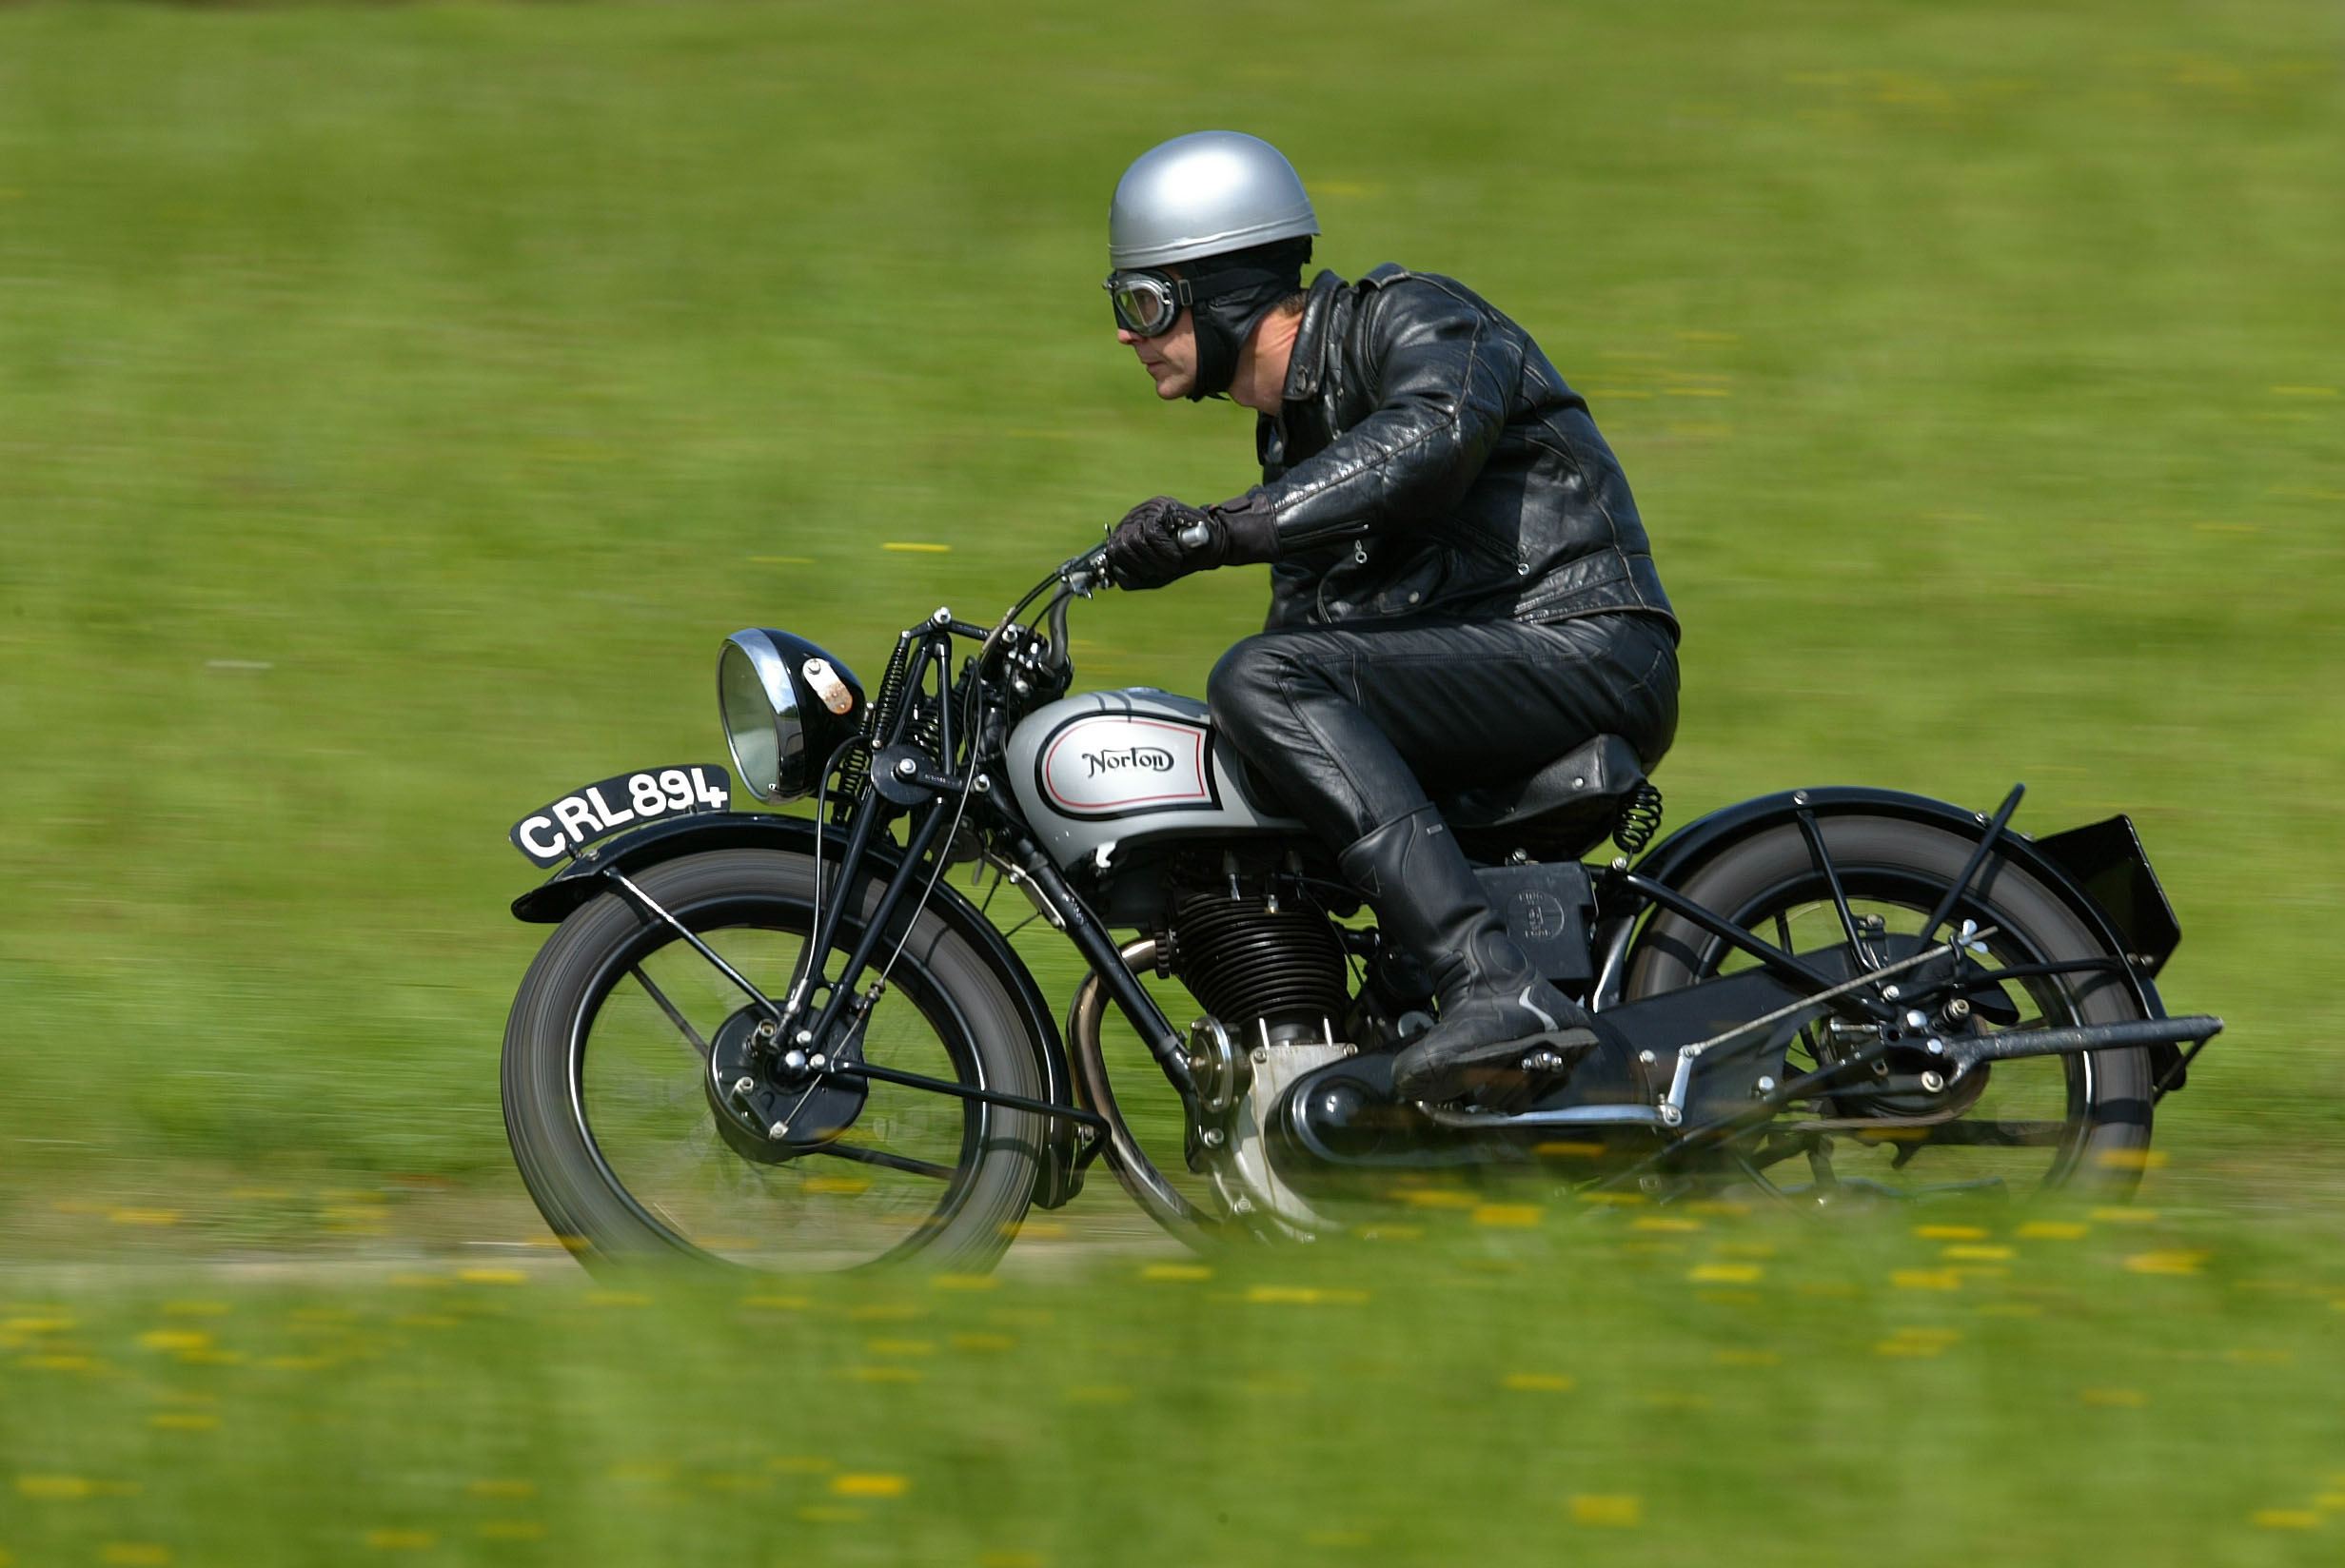 The Norton Model 18 has lean looks and a lively feel